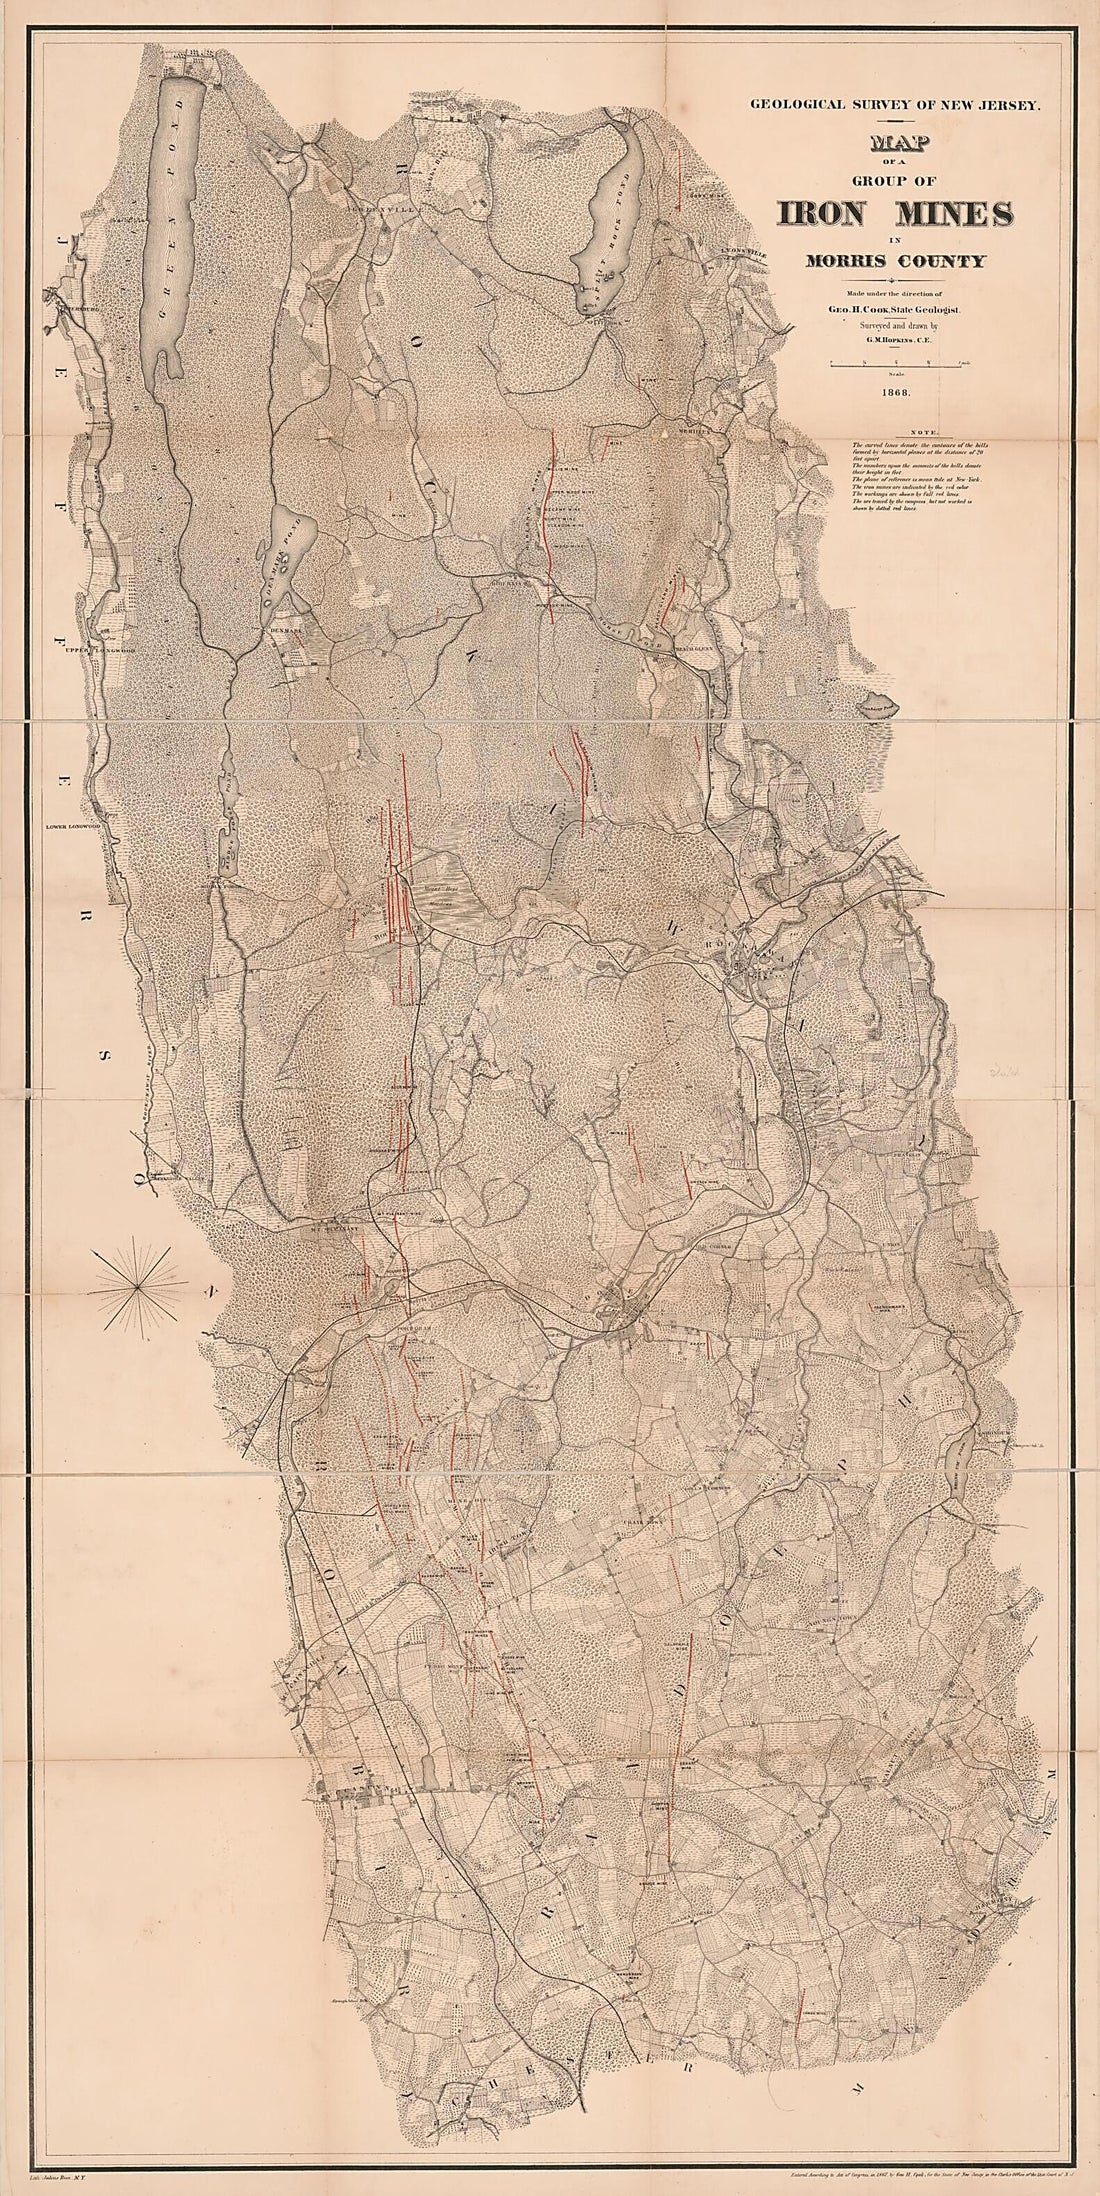 This old map of Map of a Group of Iron Mines In Morris County from 1868 was created by George Hammell Cook,  Geological Survey of New Jersey, Griffith Morgan Hopkins,  New Jersey. State Geologist in 1868